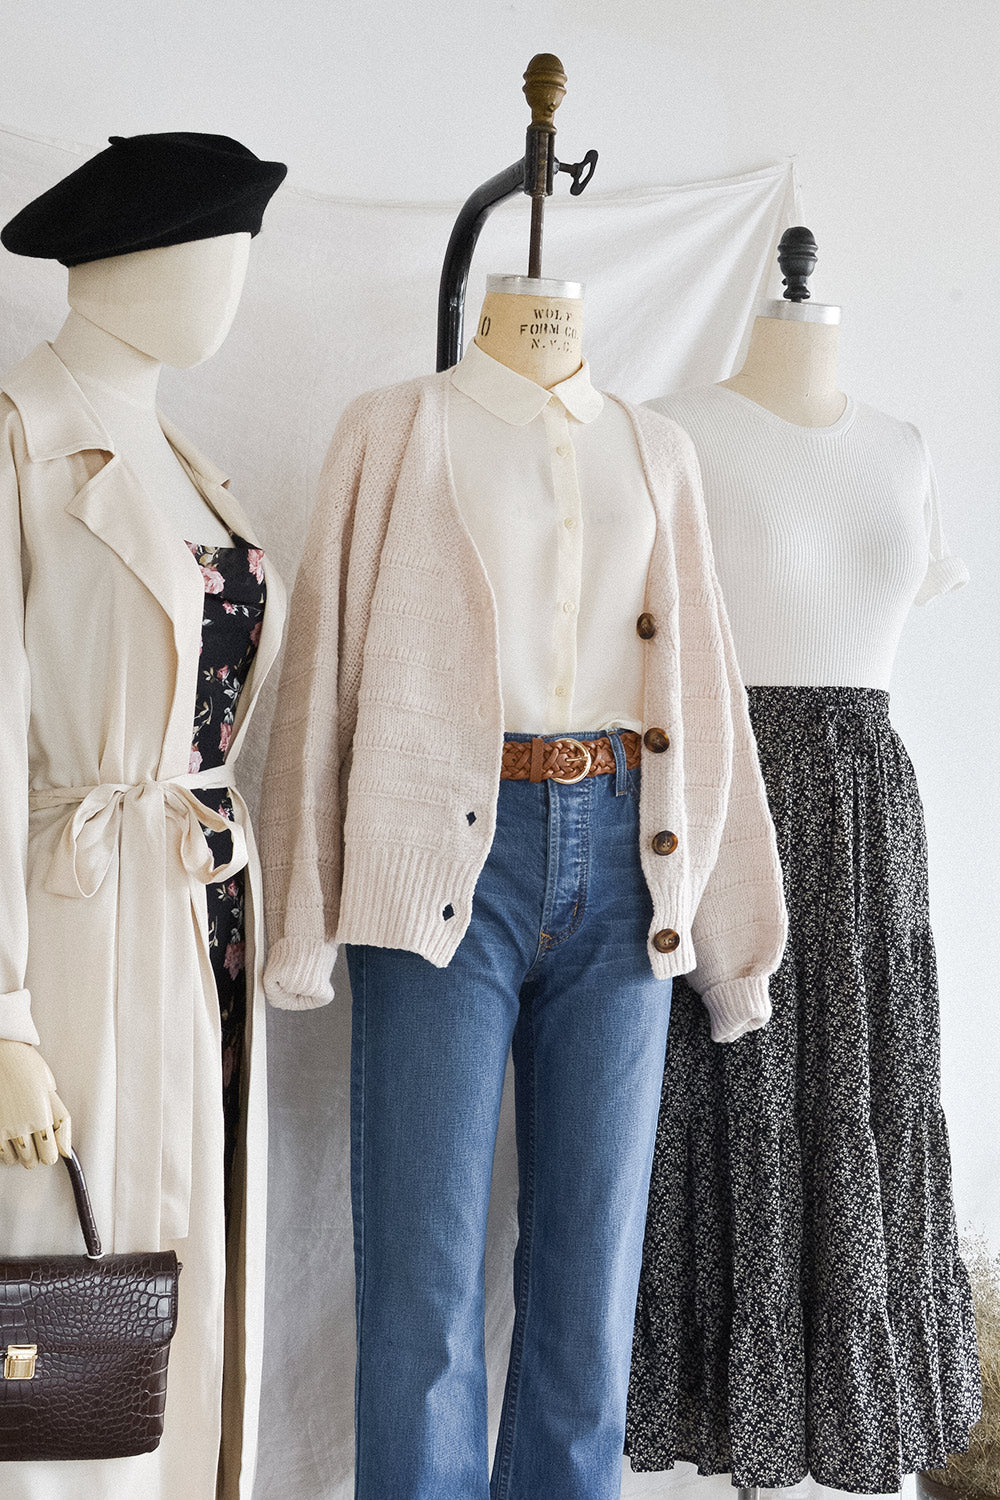 Vintage French Girl Inspired Outfits - Adored Vintage Women's Clothing Store